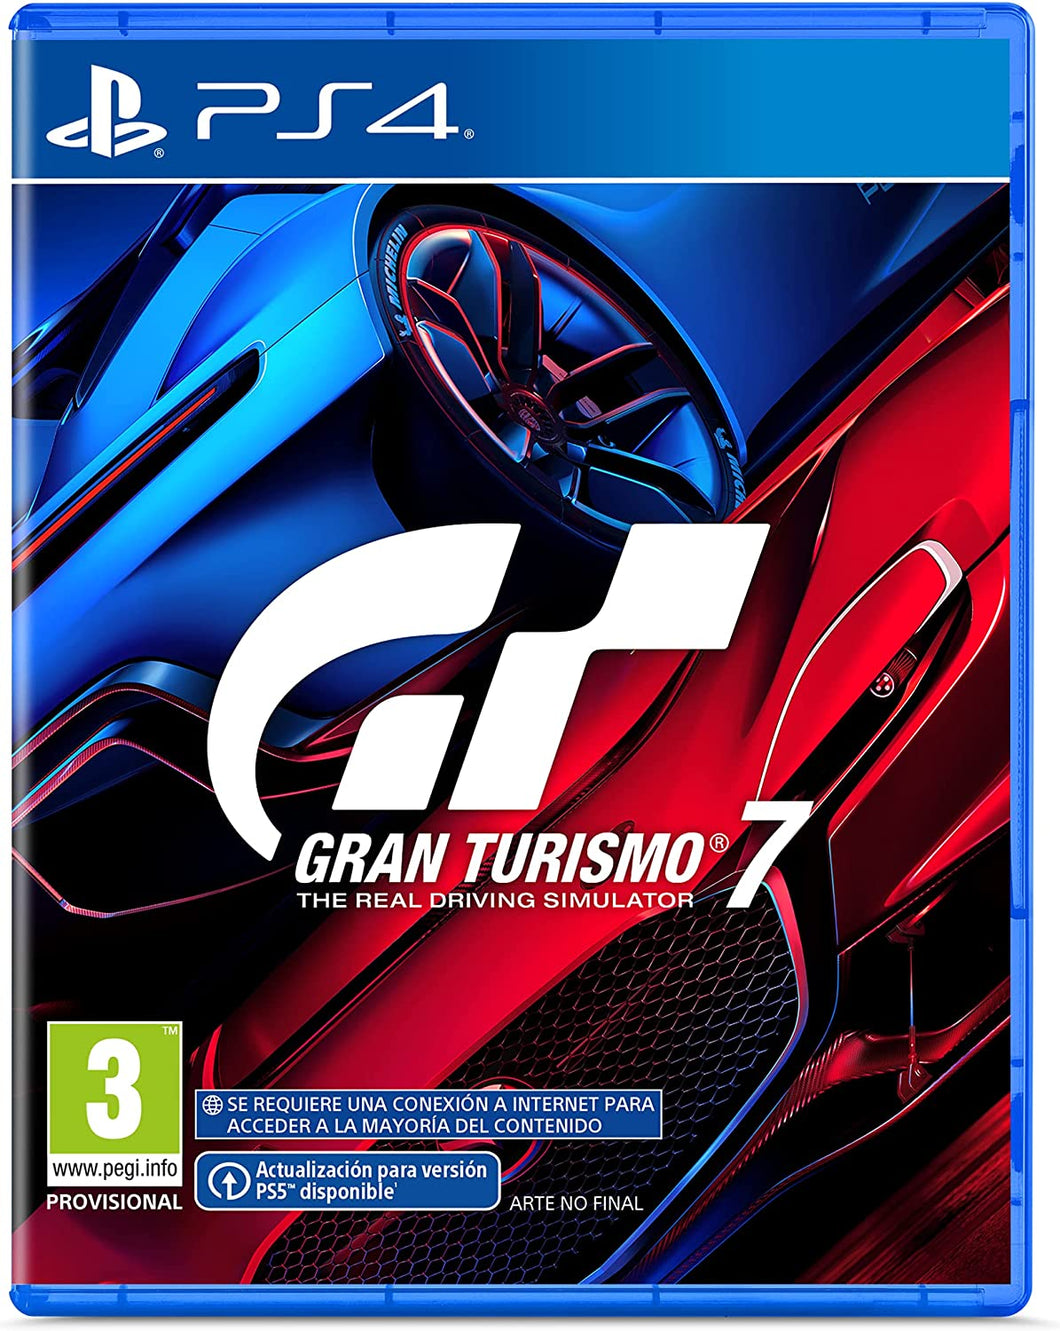 SONY PS4 GRAN TURISMO 7 GAME